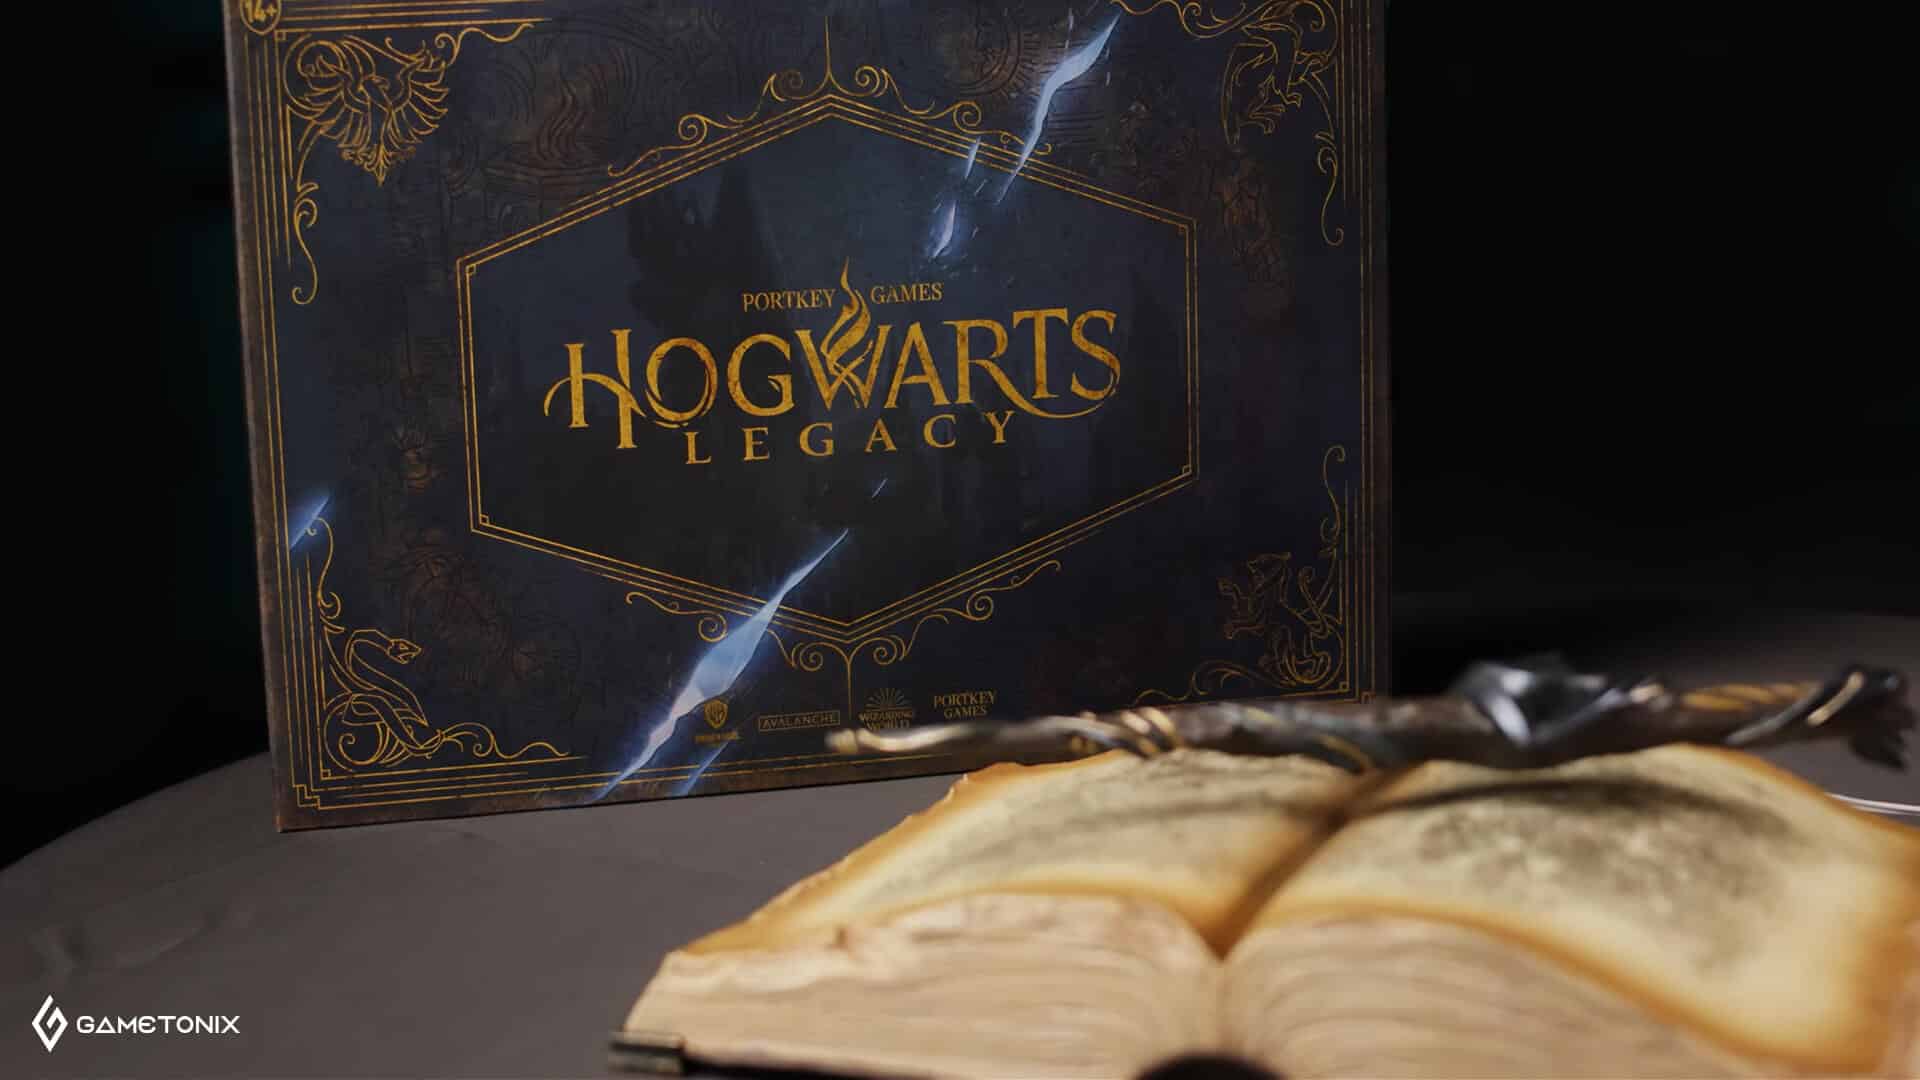 hogwarts legacy deluxe edition switch